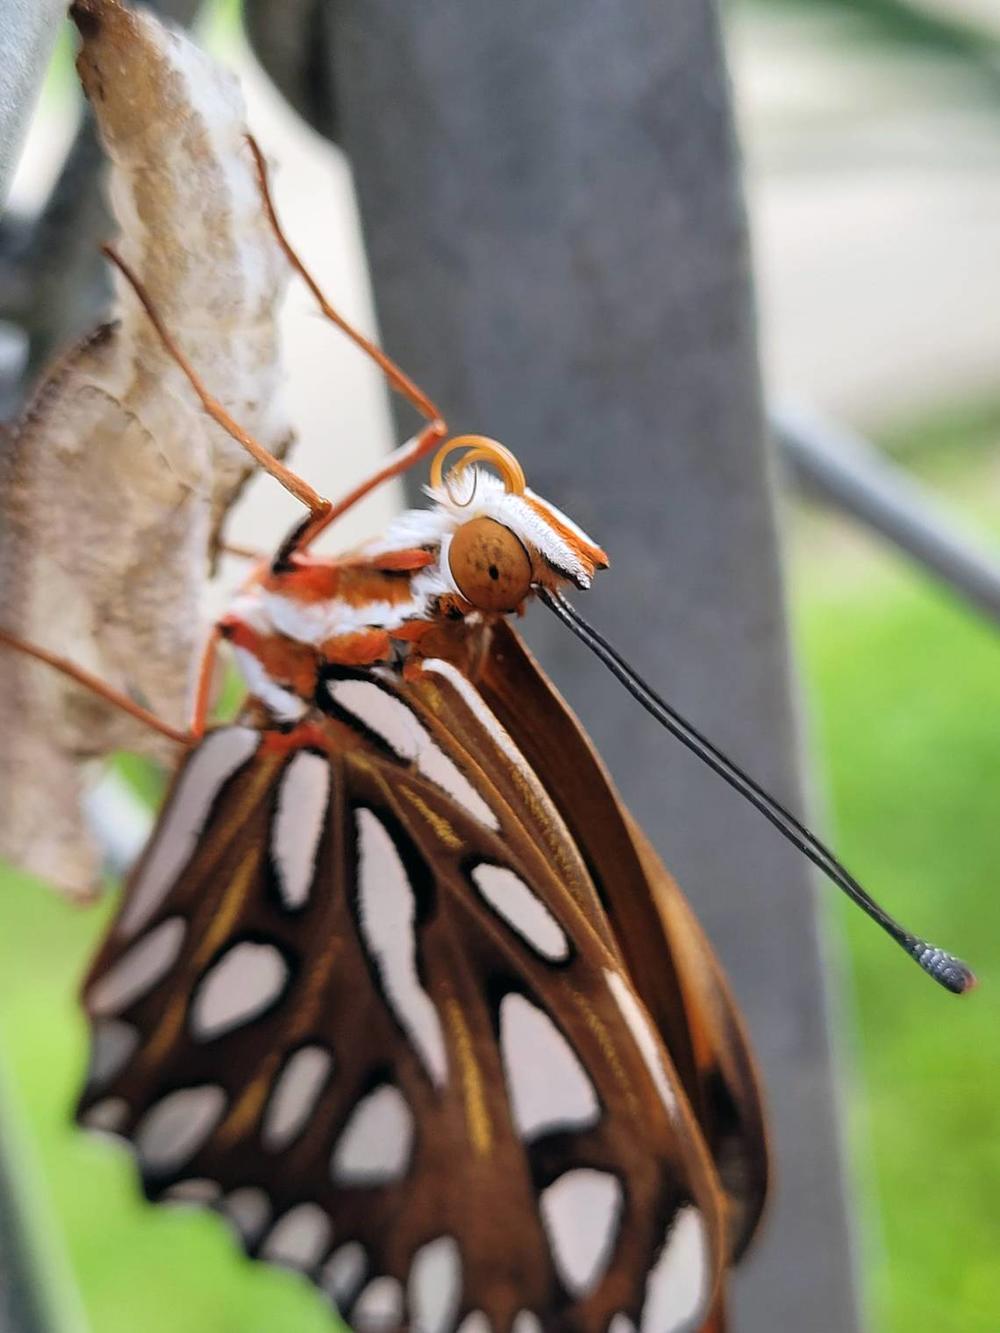 A Gulf butterfly emerges from a cocoon in Desensi’s yard. Photo courtesy of Ashley Desensi  